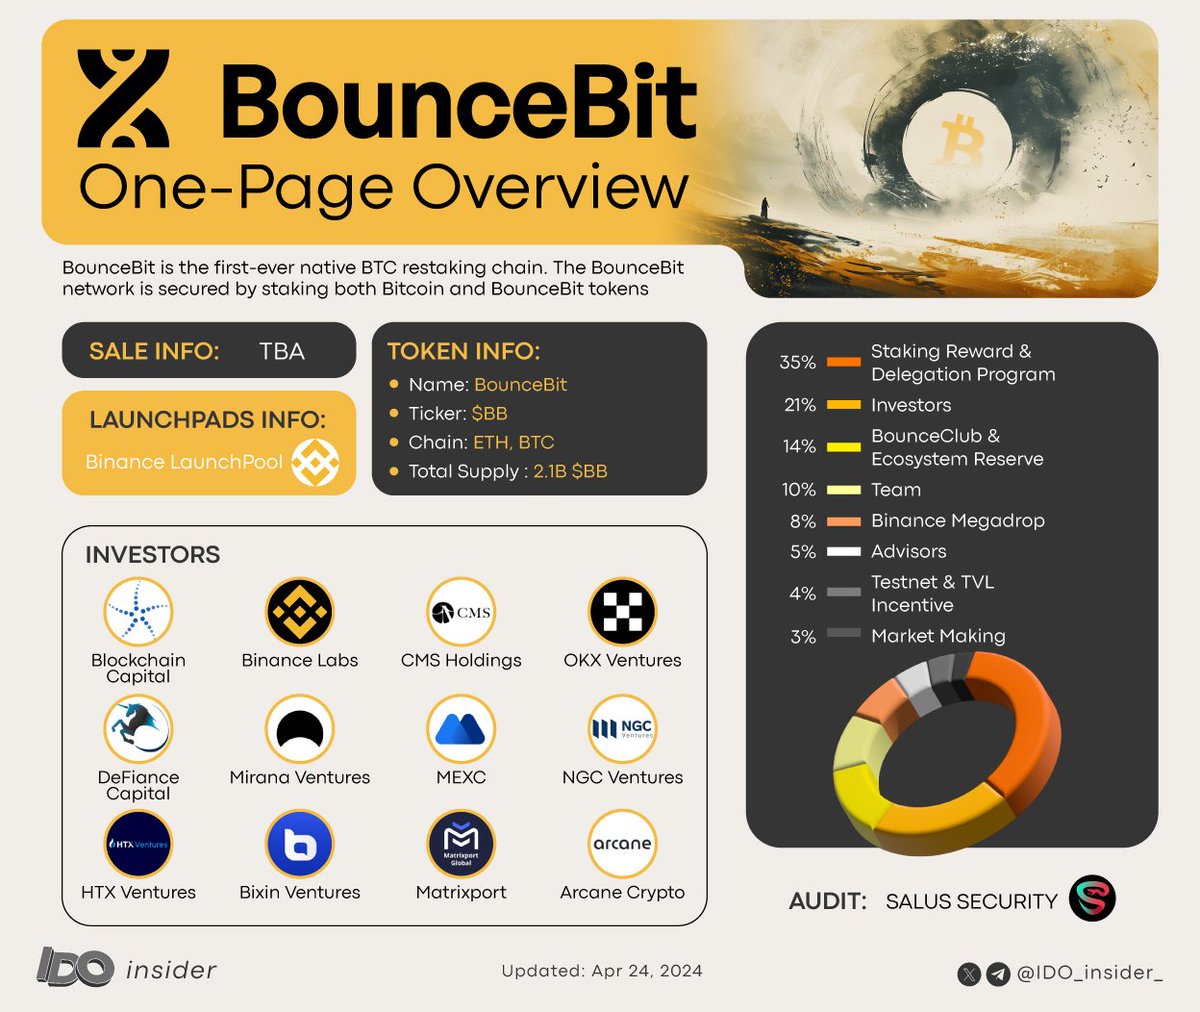 BounceBit is the first-ever native BTC restaking chain🔥🔥

🌐The BounceBit network is secured by staking both Bitcoin and BounceBit tokens. BounceBit's PoS mechanism introduces a unique dual-token staking system by leveraging native BTC security with full EVM compatibility